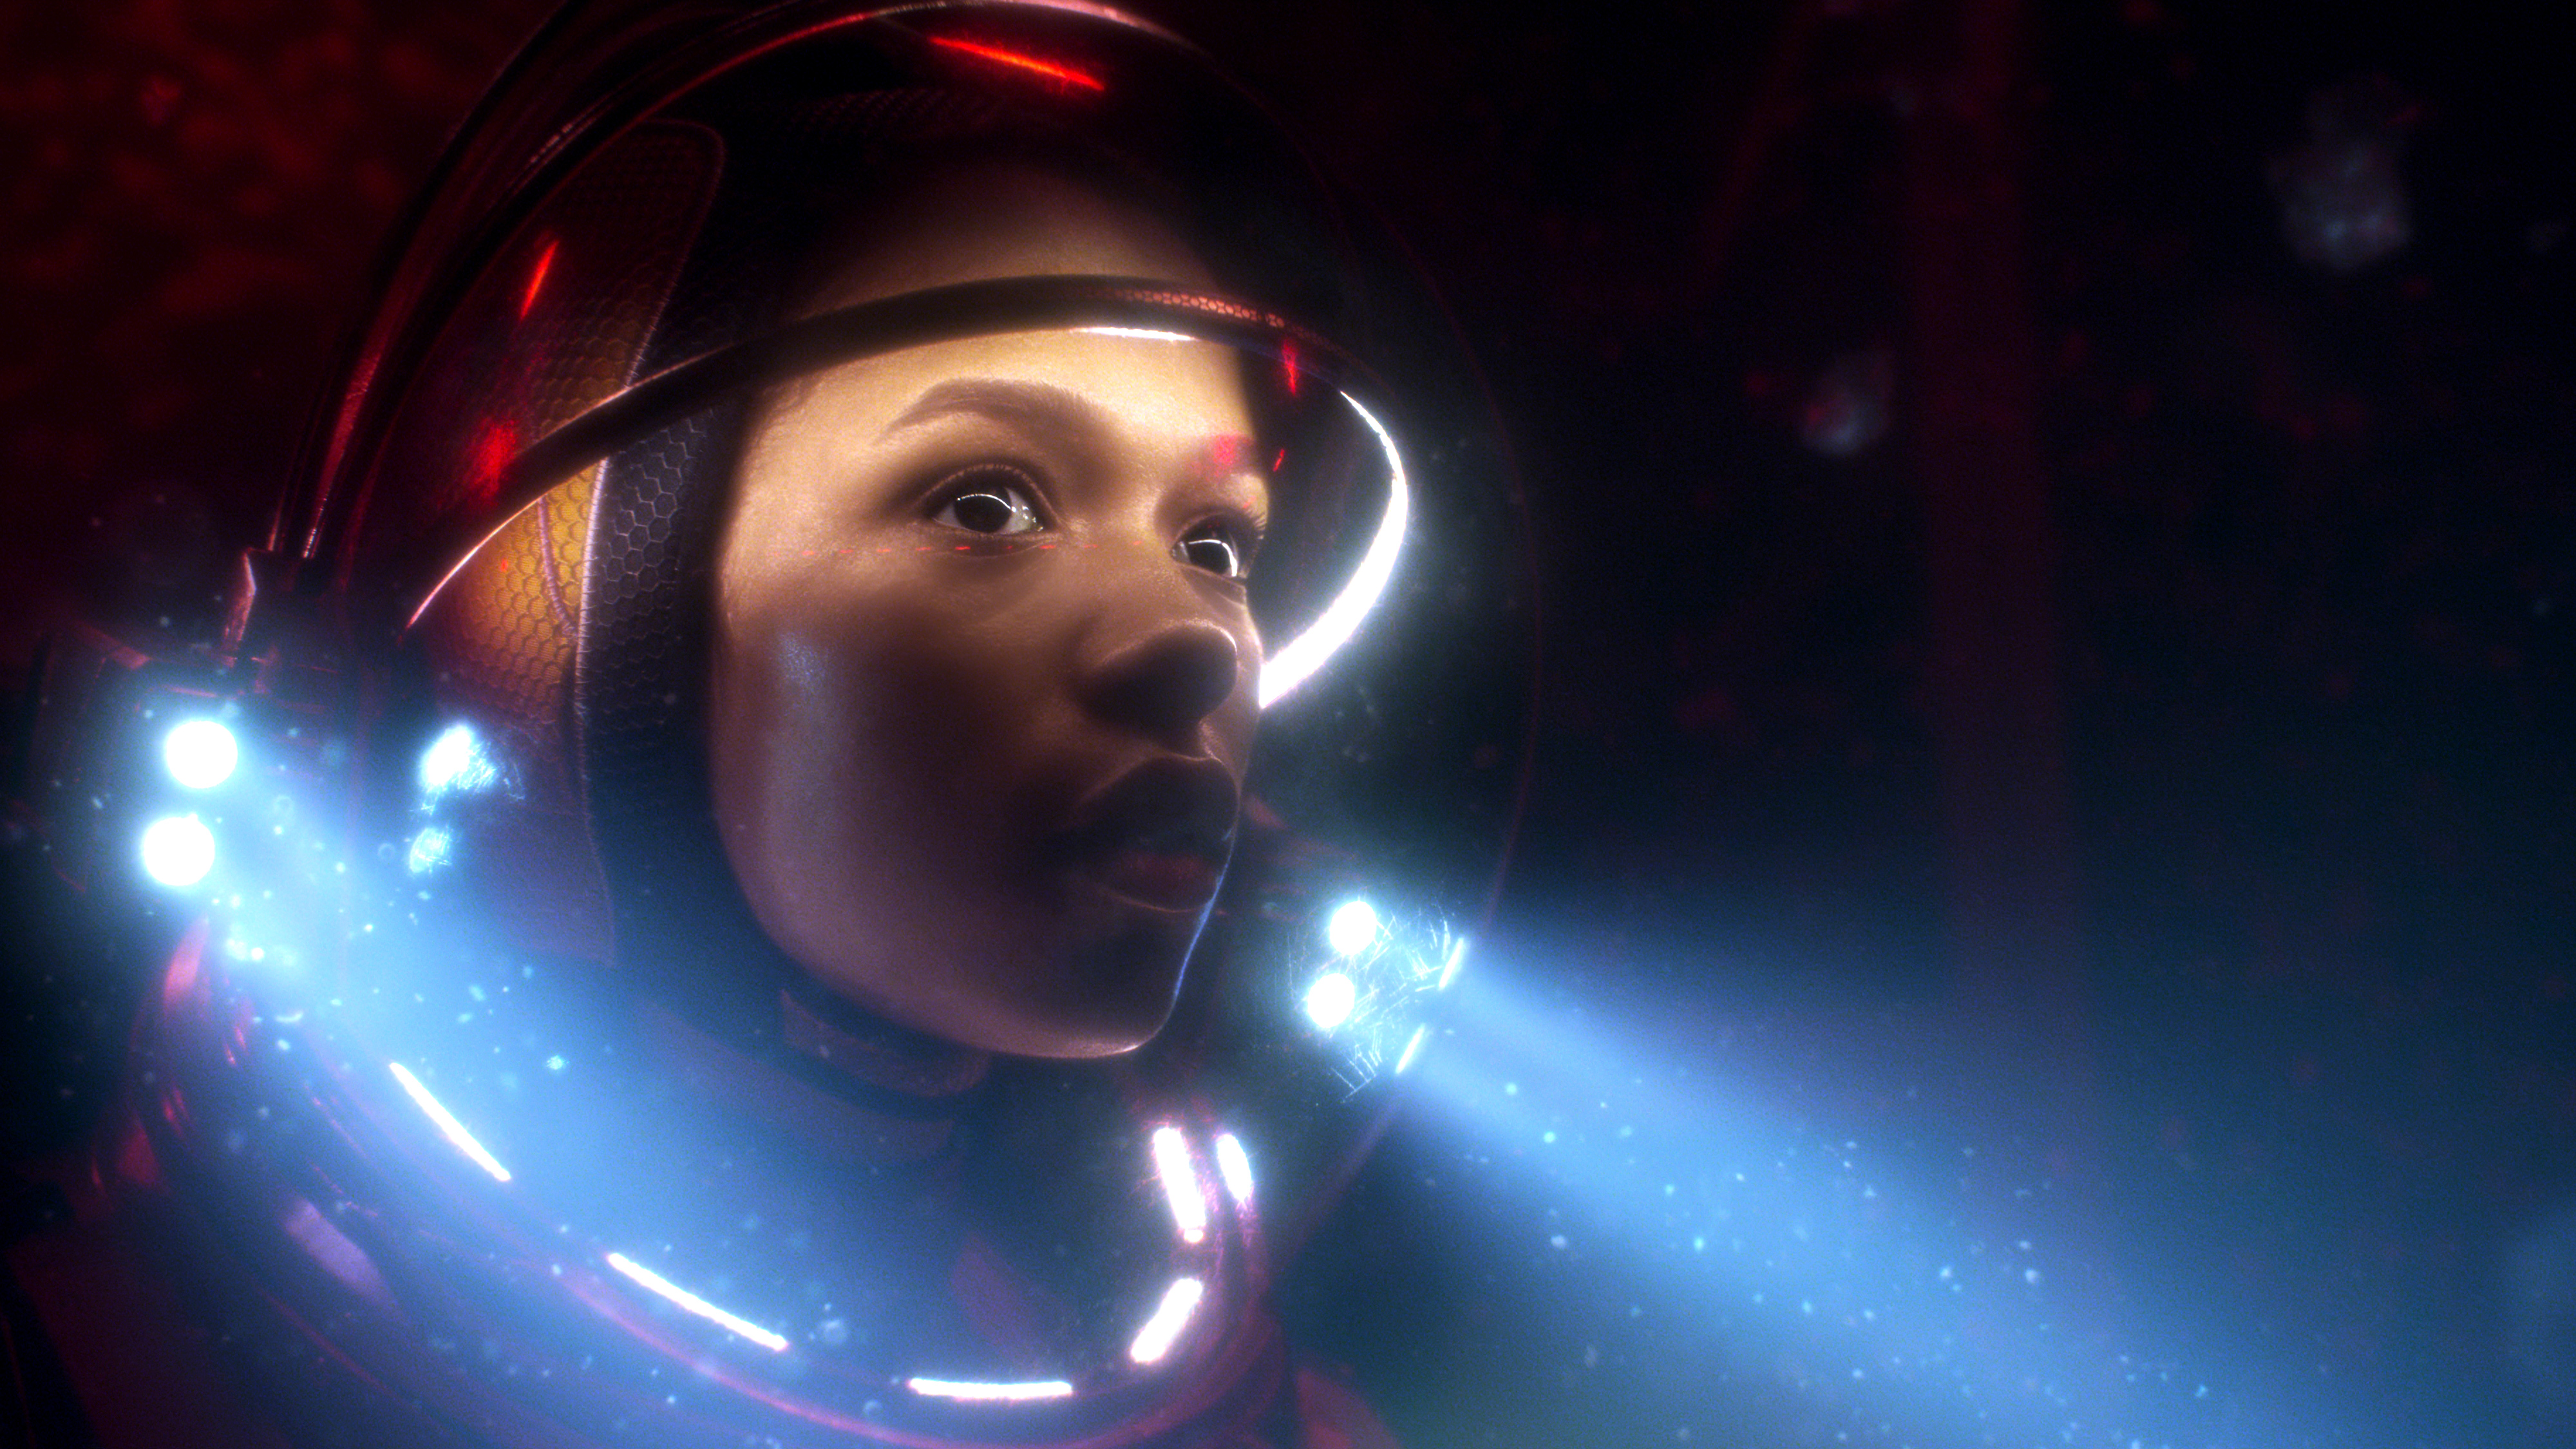 Taylor Russell as Judy in Lost in Space 4K3723419095 - Taylor Russell as Judy in Lost in Space 4K - Taylor, Space, Russell, Lost, Judy